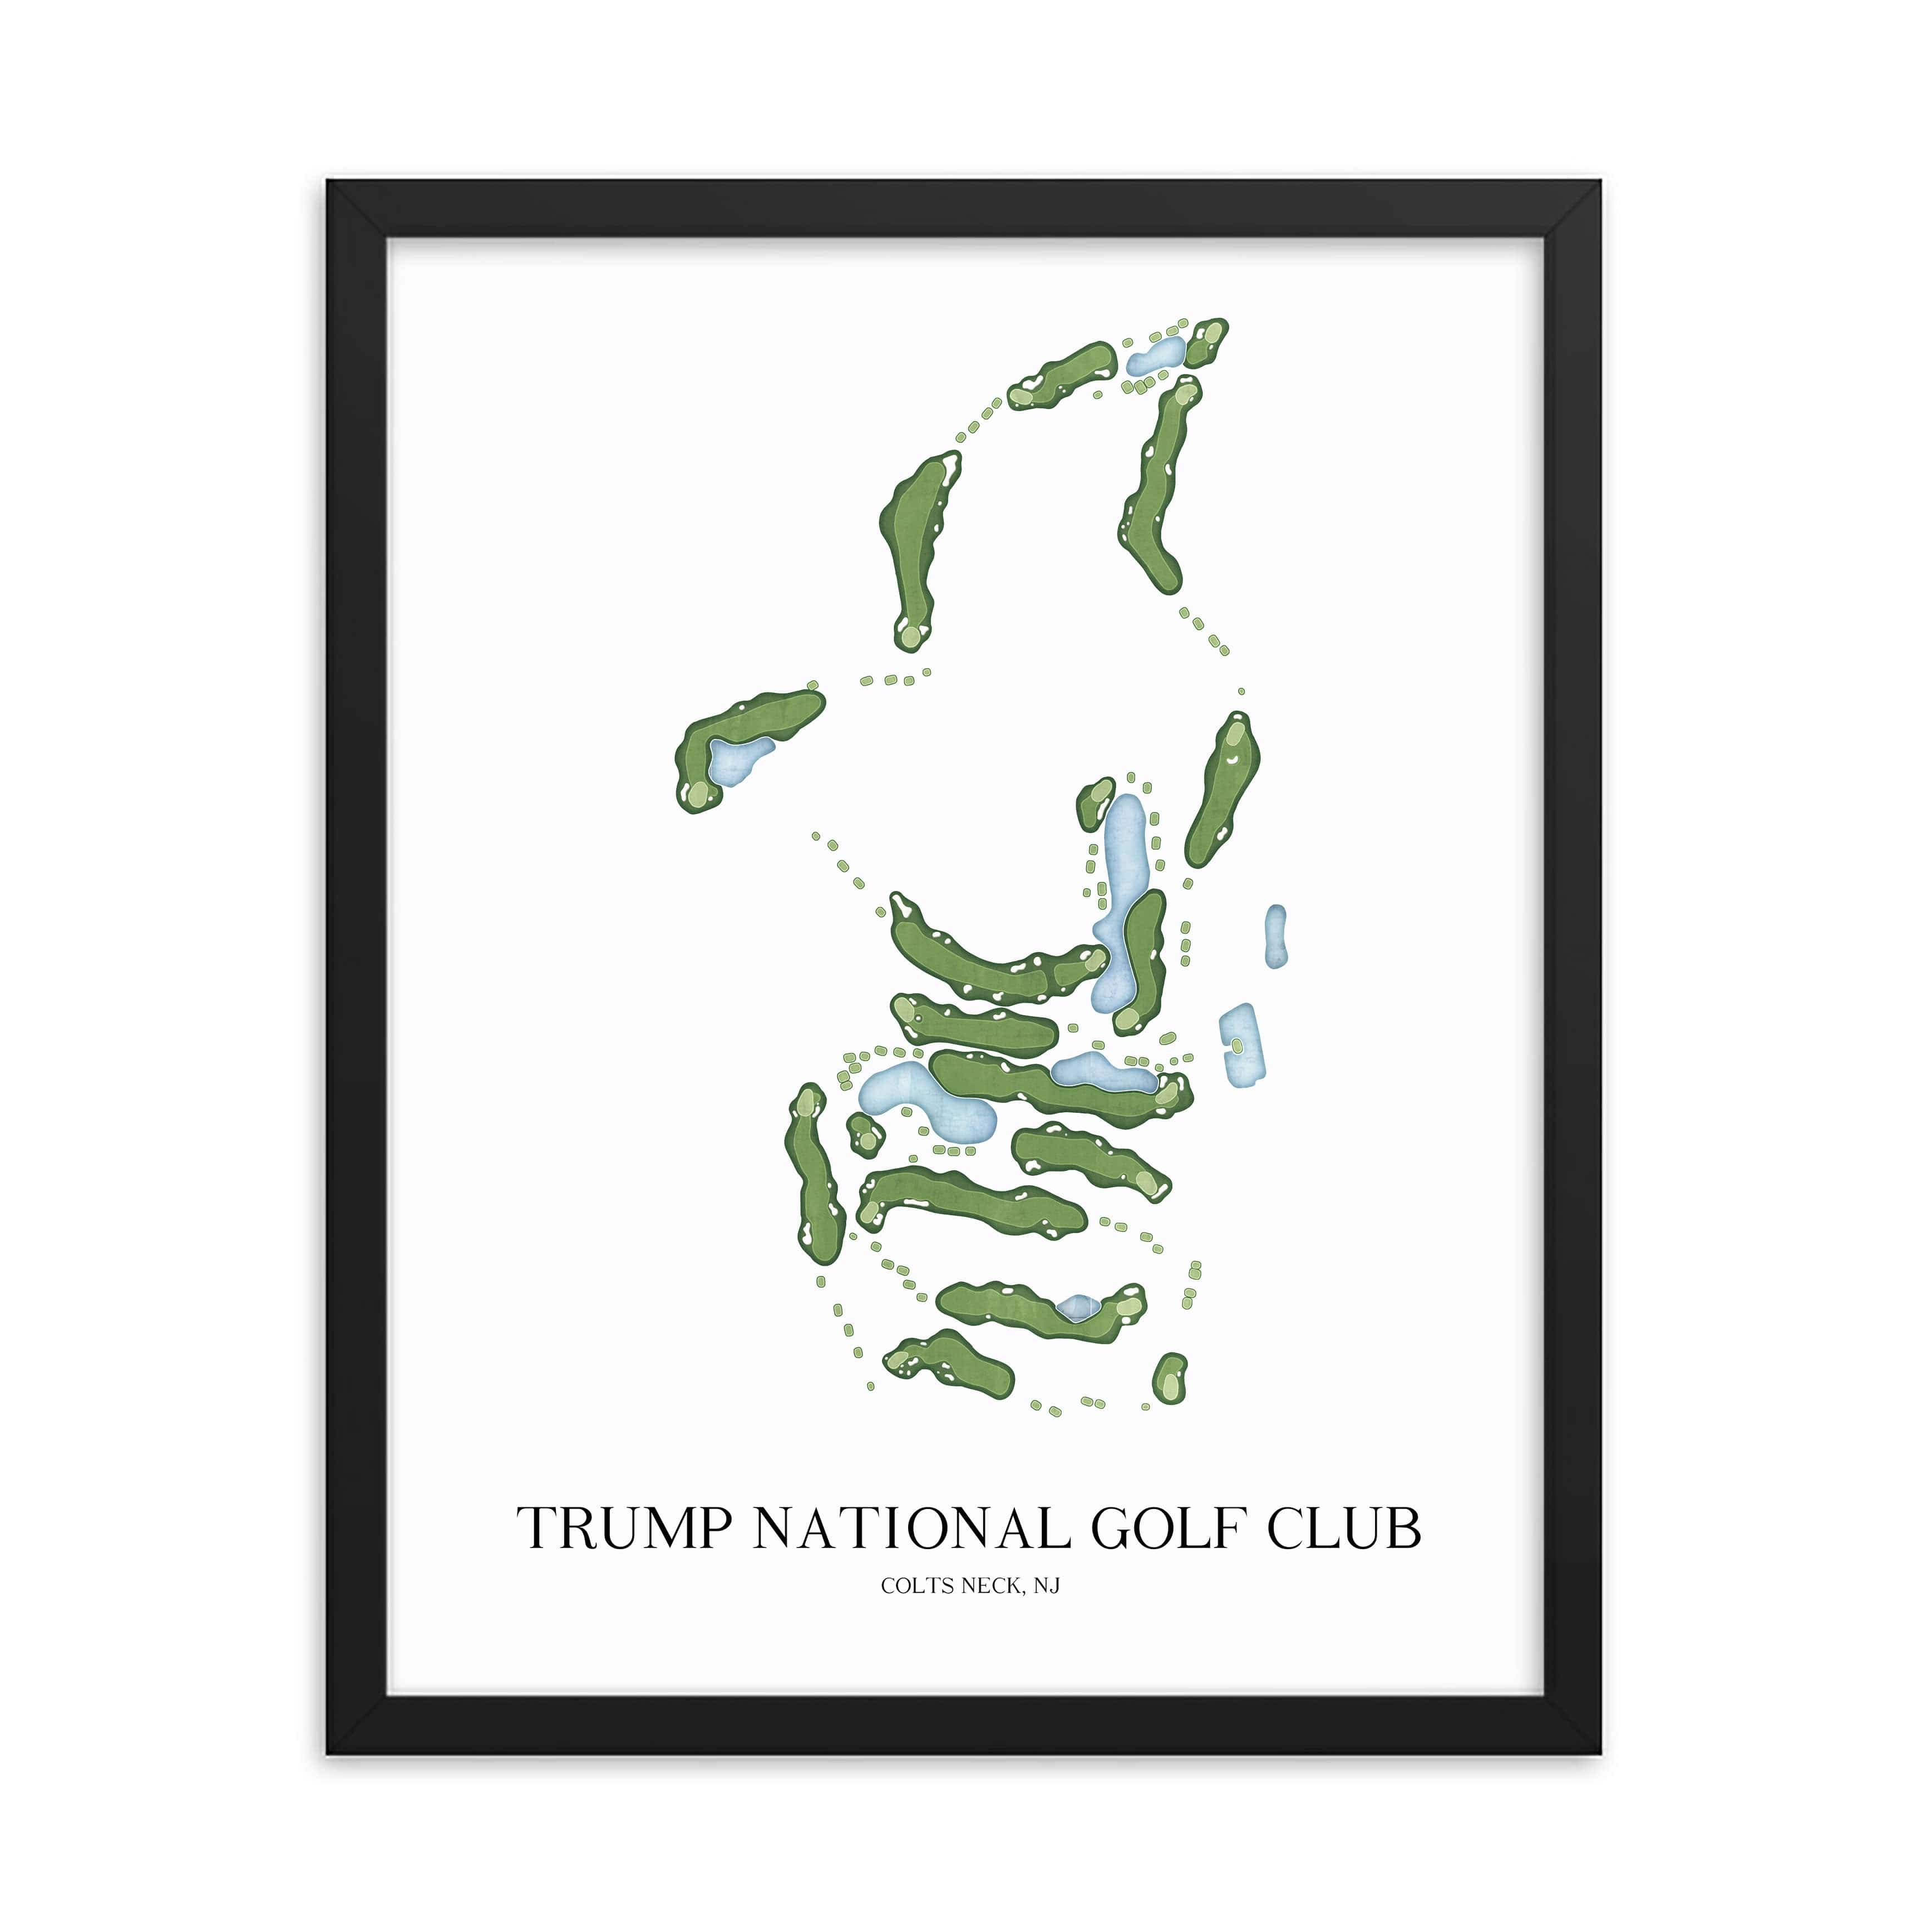 The 19th Hole Golf Shop - Golf Course Prints -  Trump National - Colts Neck Golf Course Map